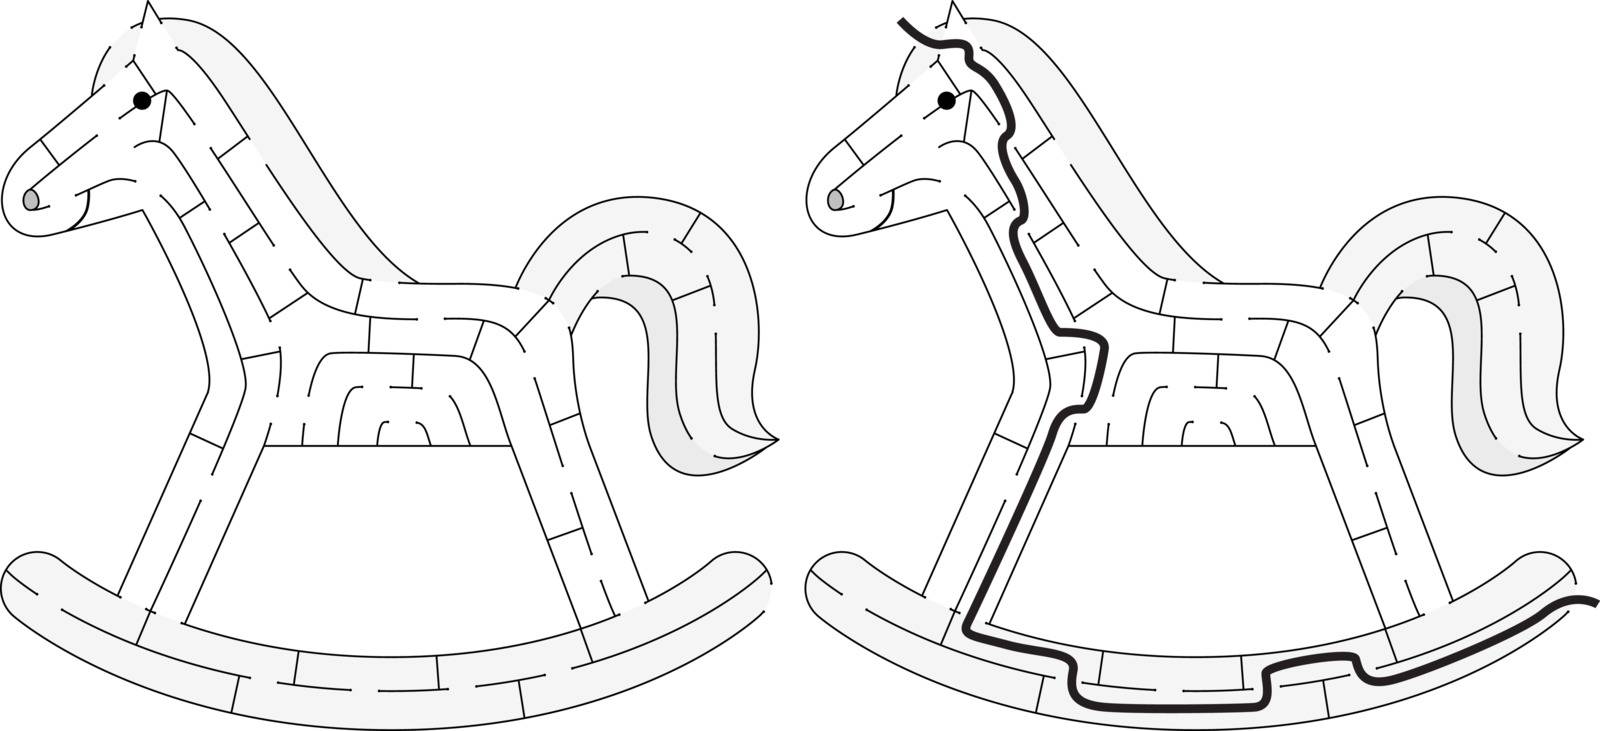 Easy rocking horse maze for kids with a solution in black and white